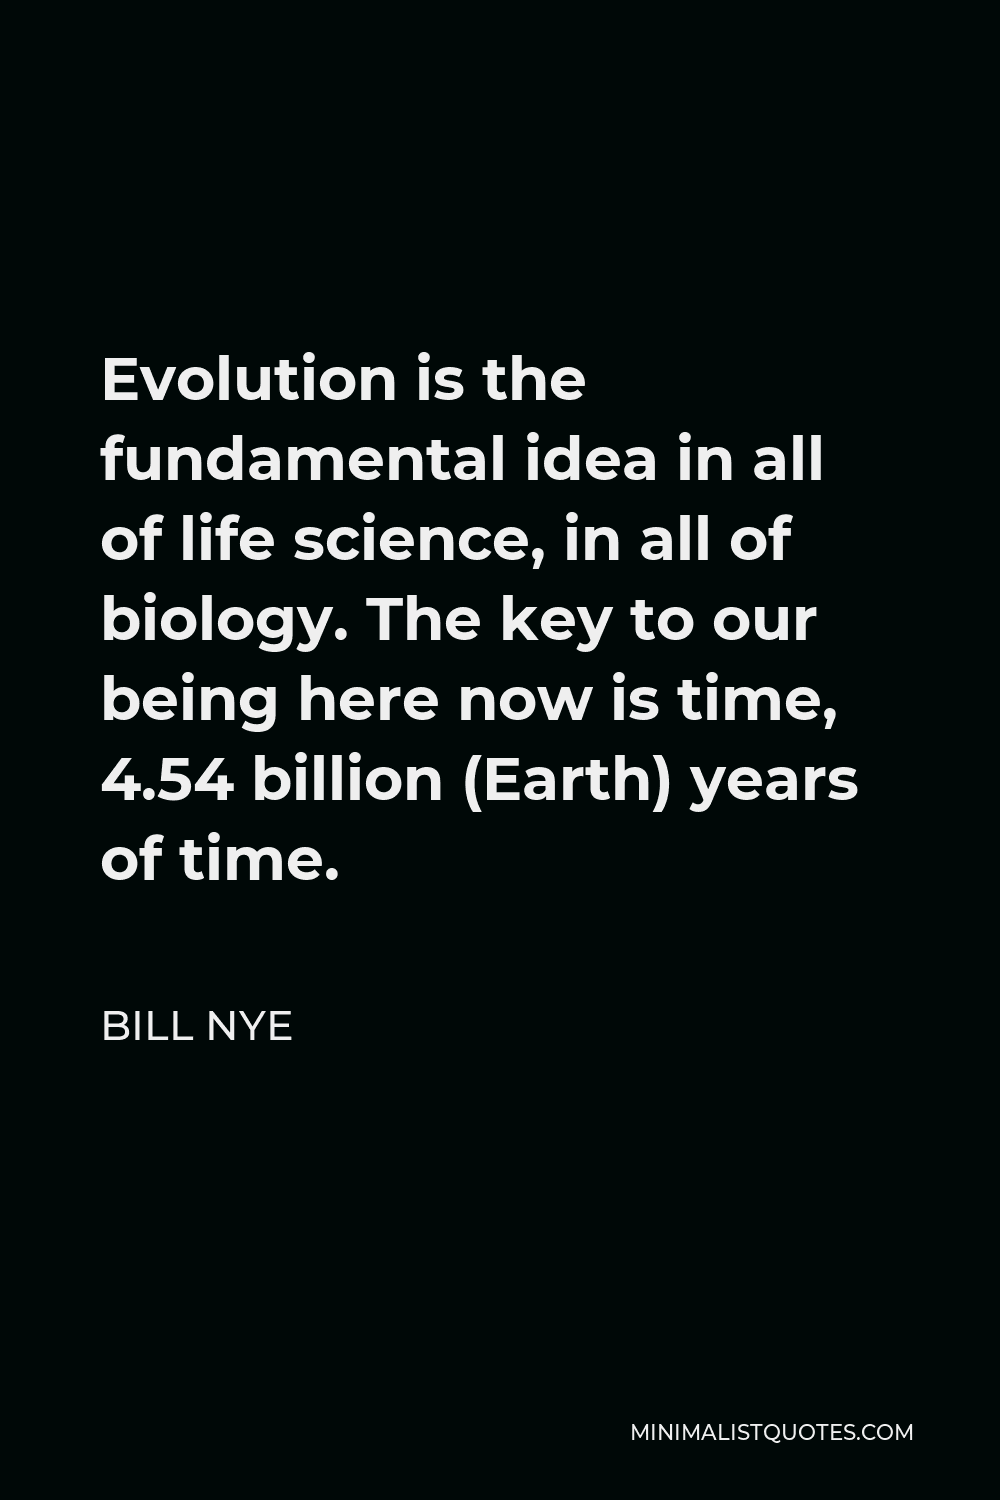 Bill Nye Quote - Evolution is the fundamental idea in all of life science, in all of biology. The key to our being here now is time, 4.54 billion (Earth) years of time.